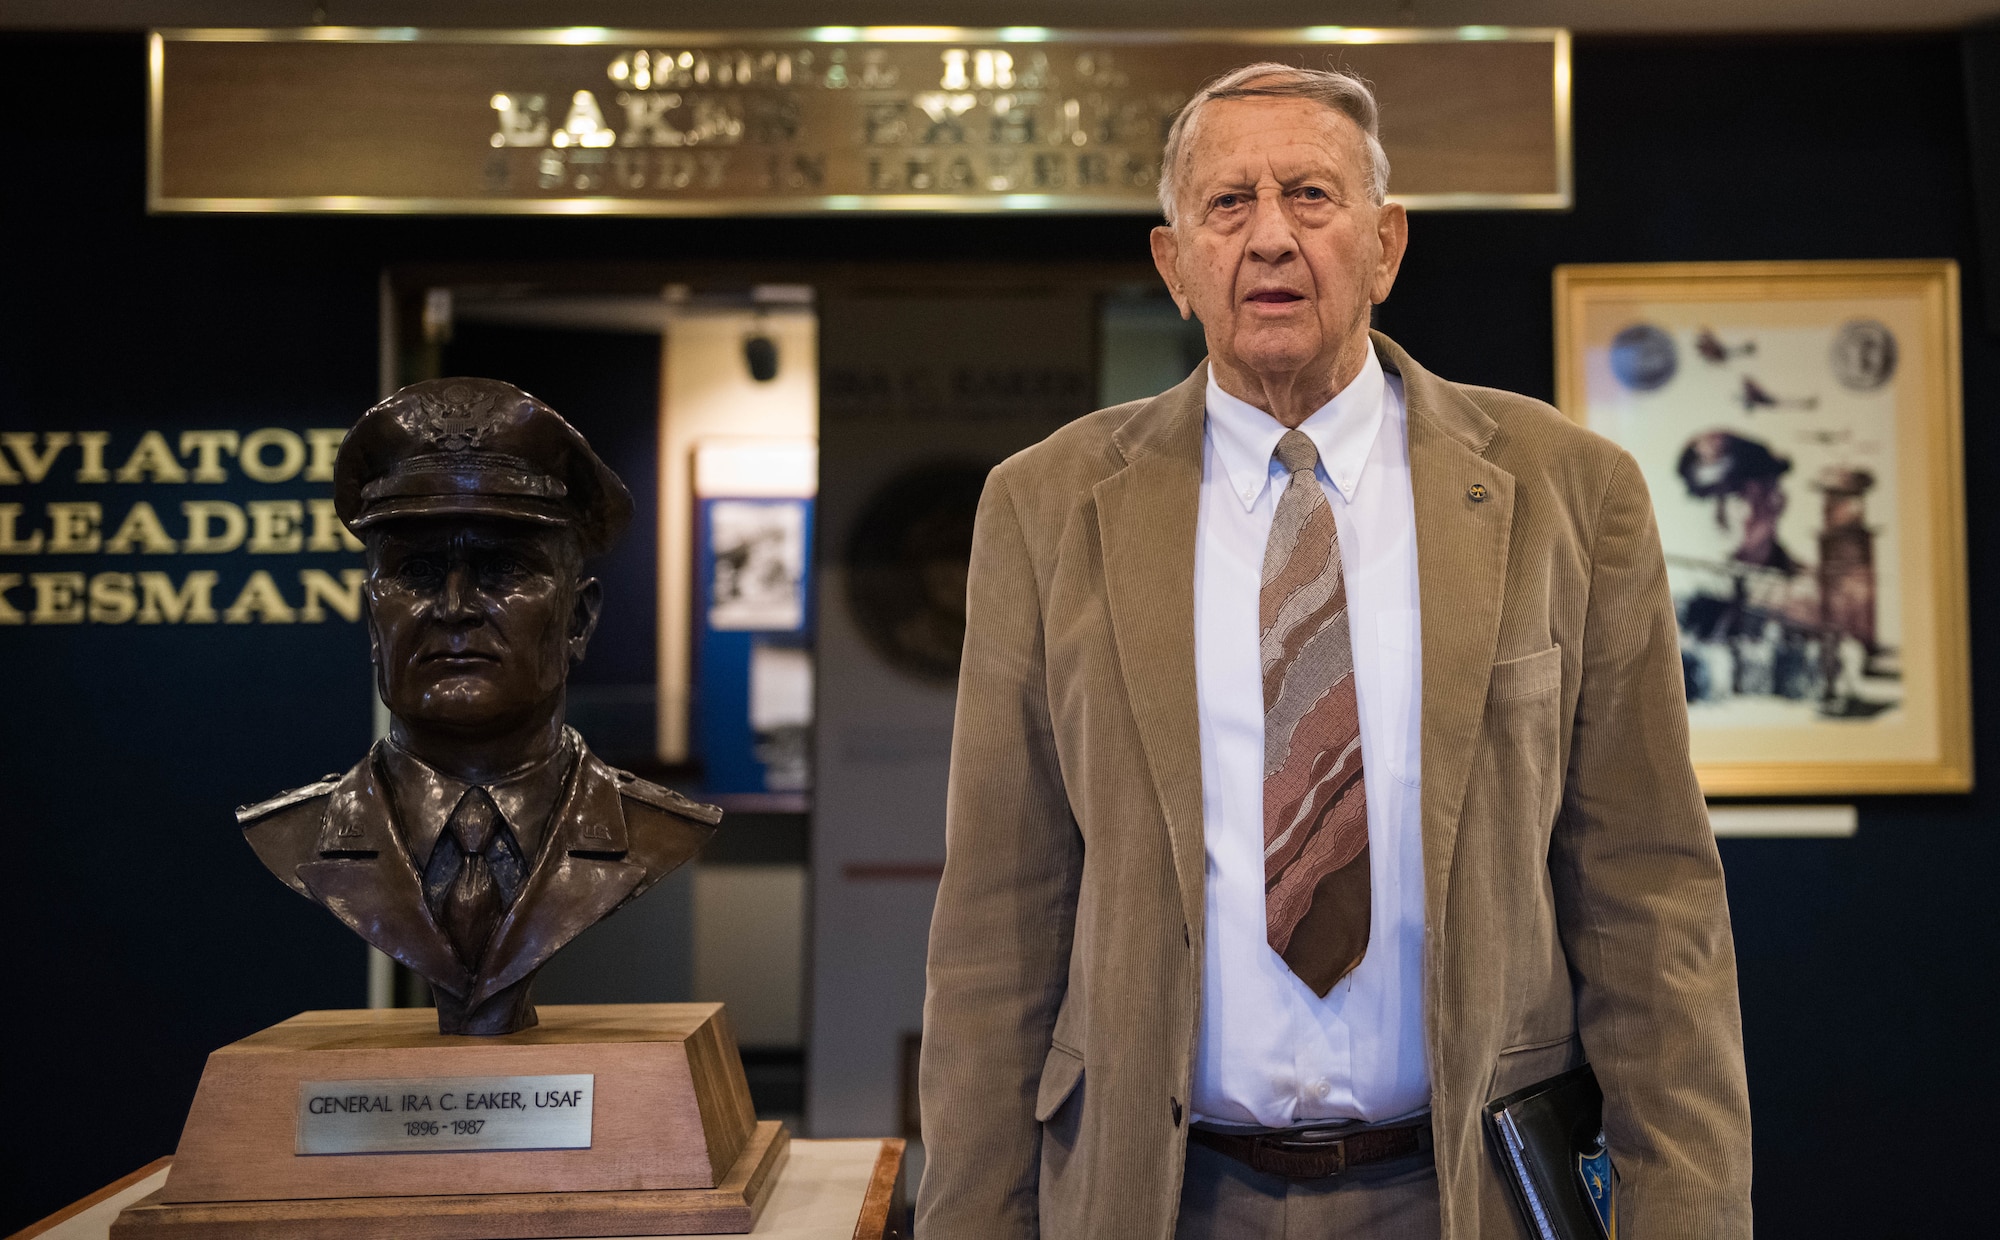 Dr. Richard I. Lester, a professor at Air University poses for a photo at the Ira C. Eaker Center for Leadership Development on Mar. 3, 2021, Maxwell Air Force Base, Ala. After 57 years of service to AU and the Air Force, Lester is retiring with the knowledge that he has made a large impact on the organization as a whole. (U.S. Air Force photo by Airman 1st Class Cody Gandy)